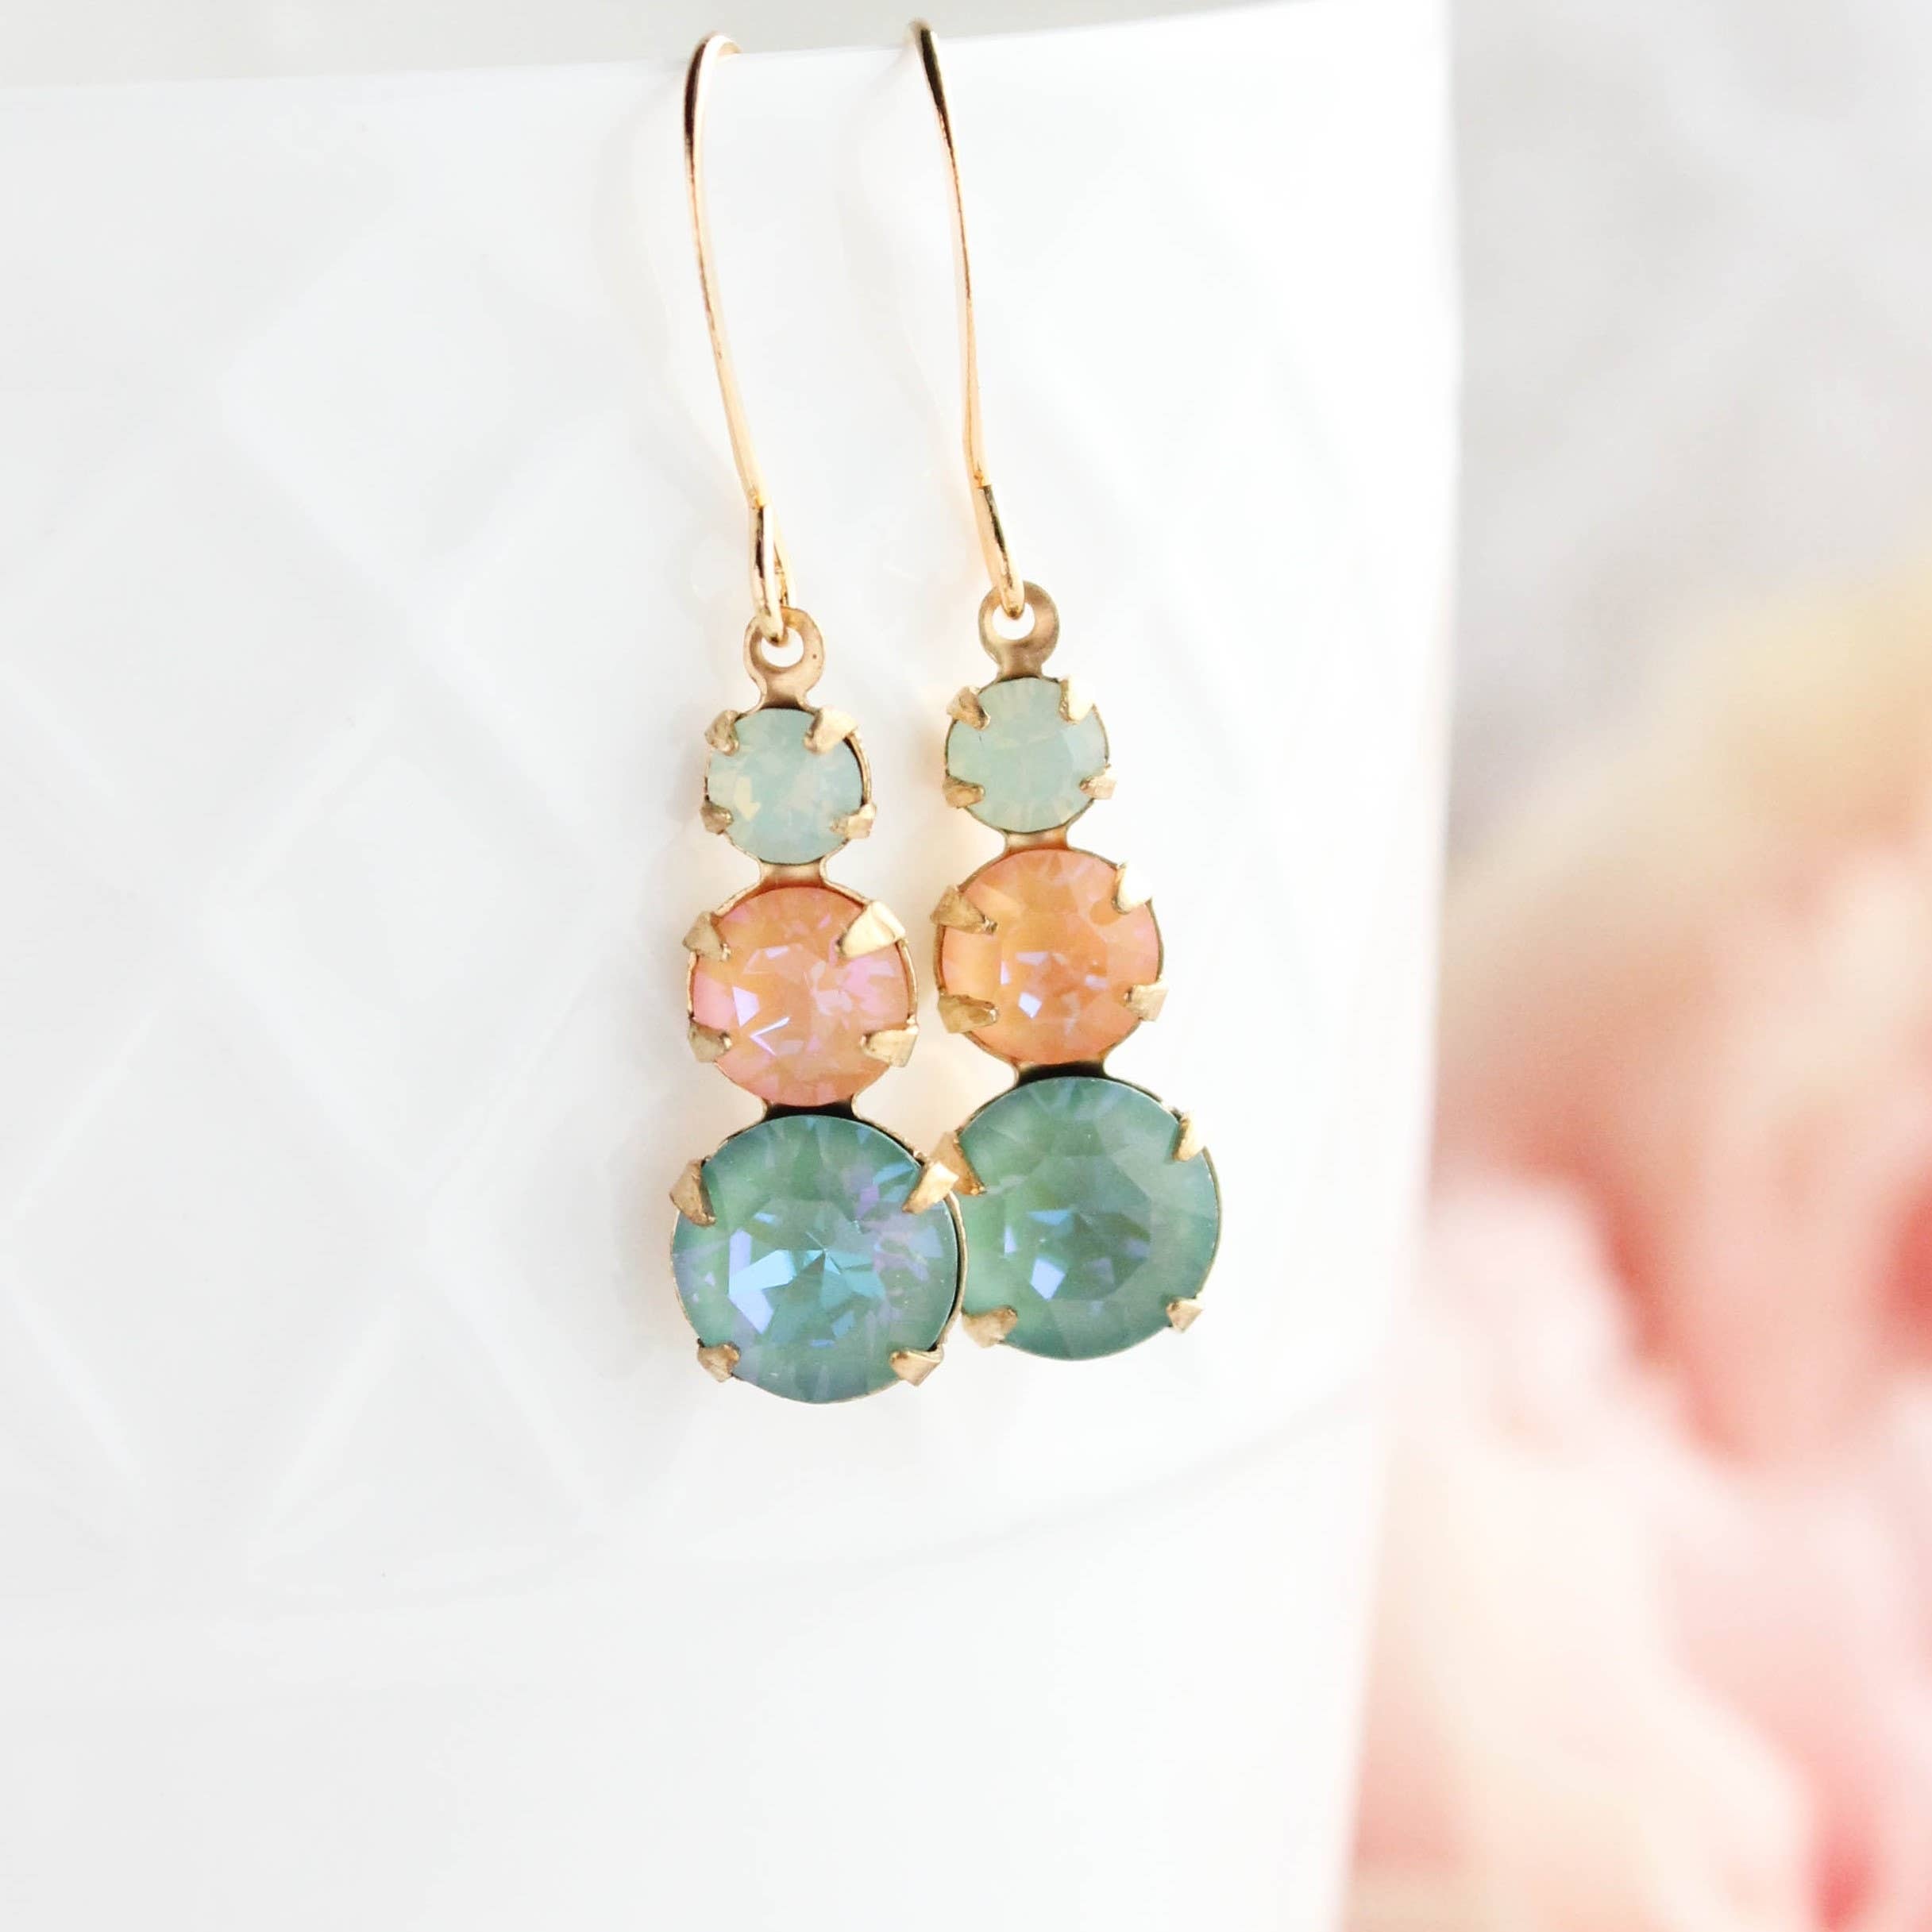 Three Jewel Earrings - Out of the Blue